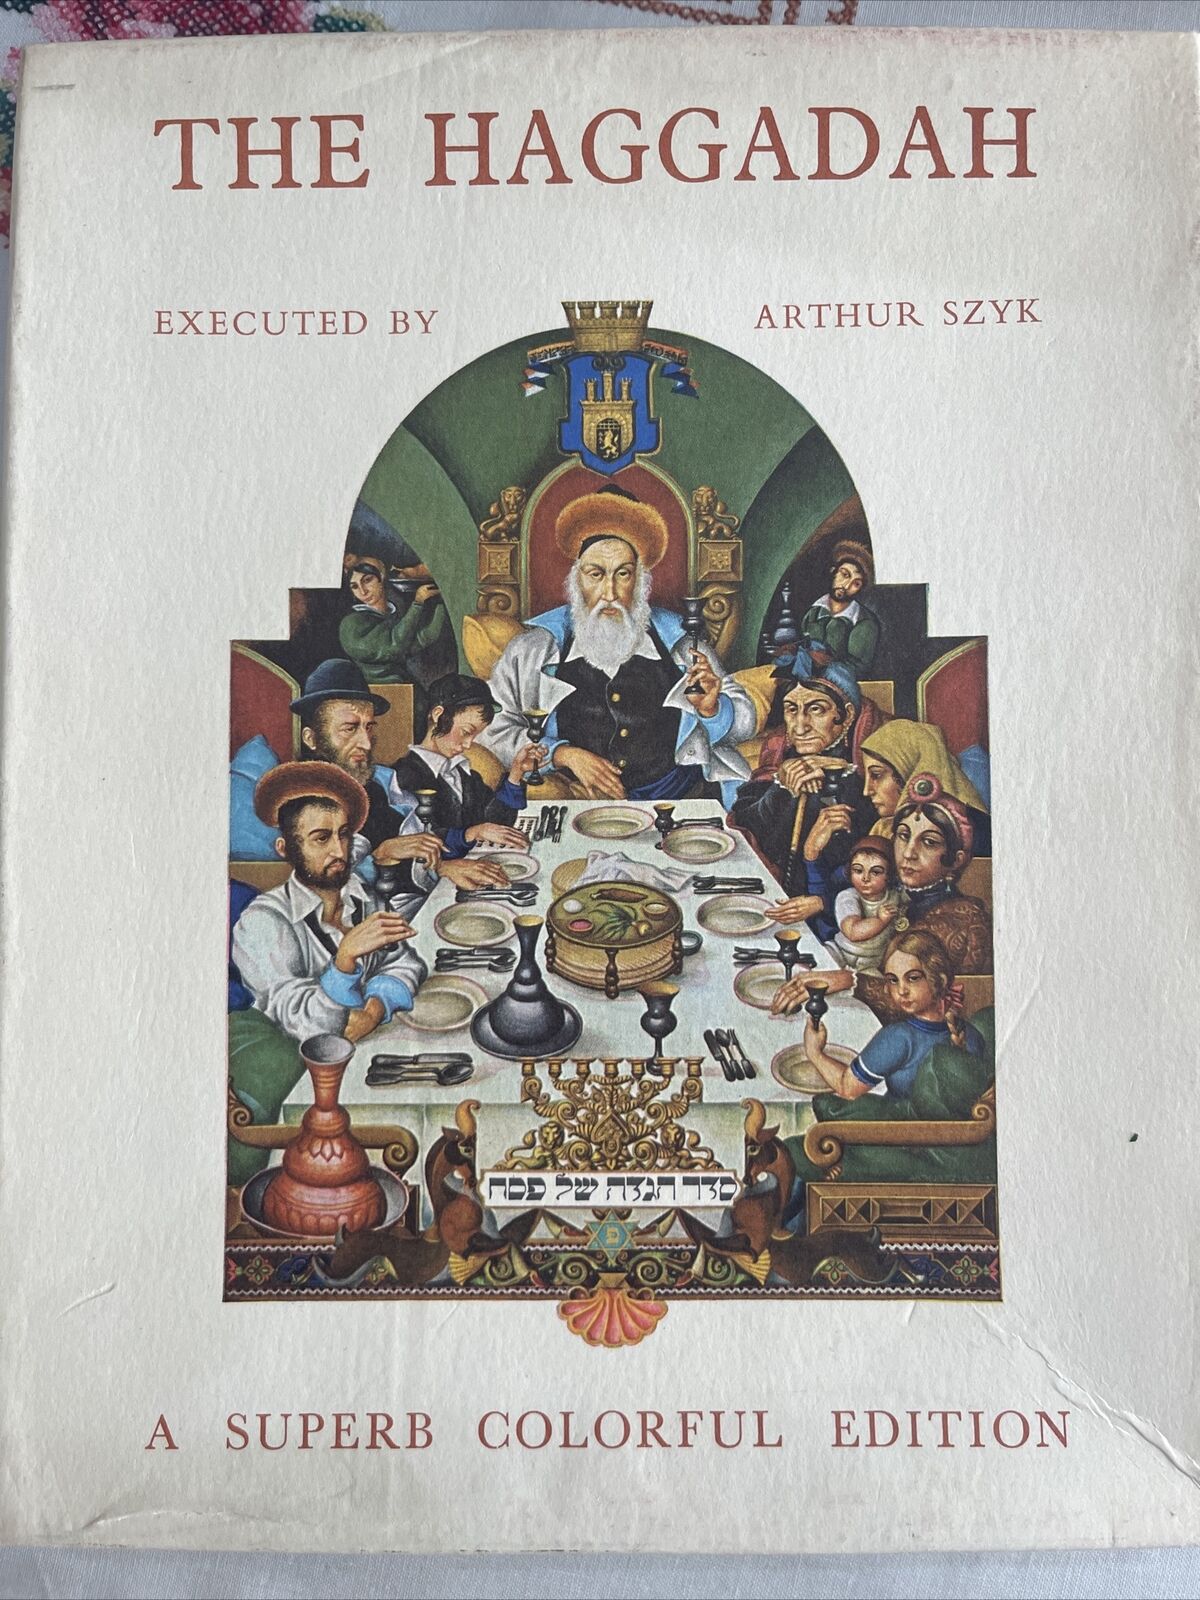 Vtg Judaica Metal Cover The Haggadah by Arthur Szyk with Box